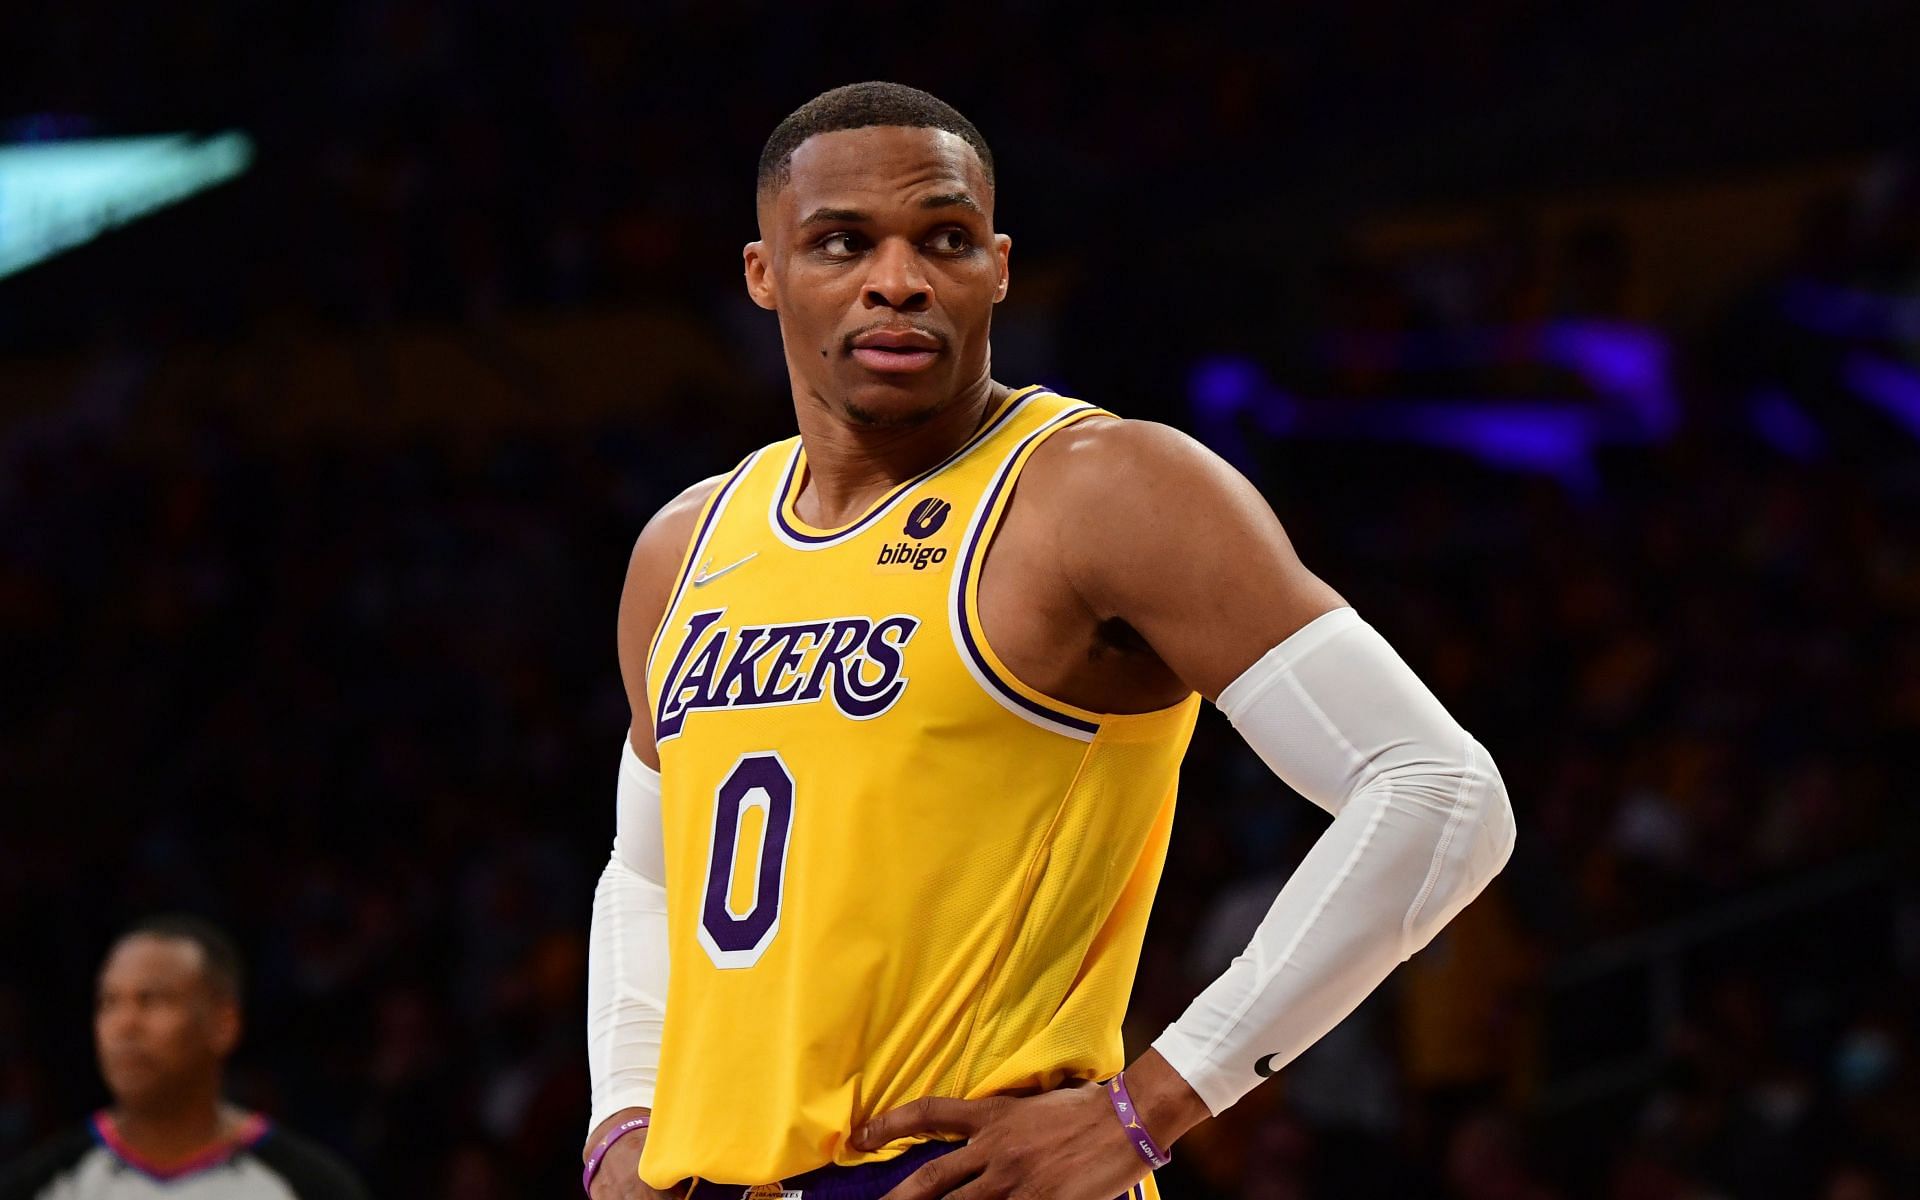 LA Lakers point guard Russell Westbrook continues to struggle this season